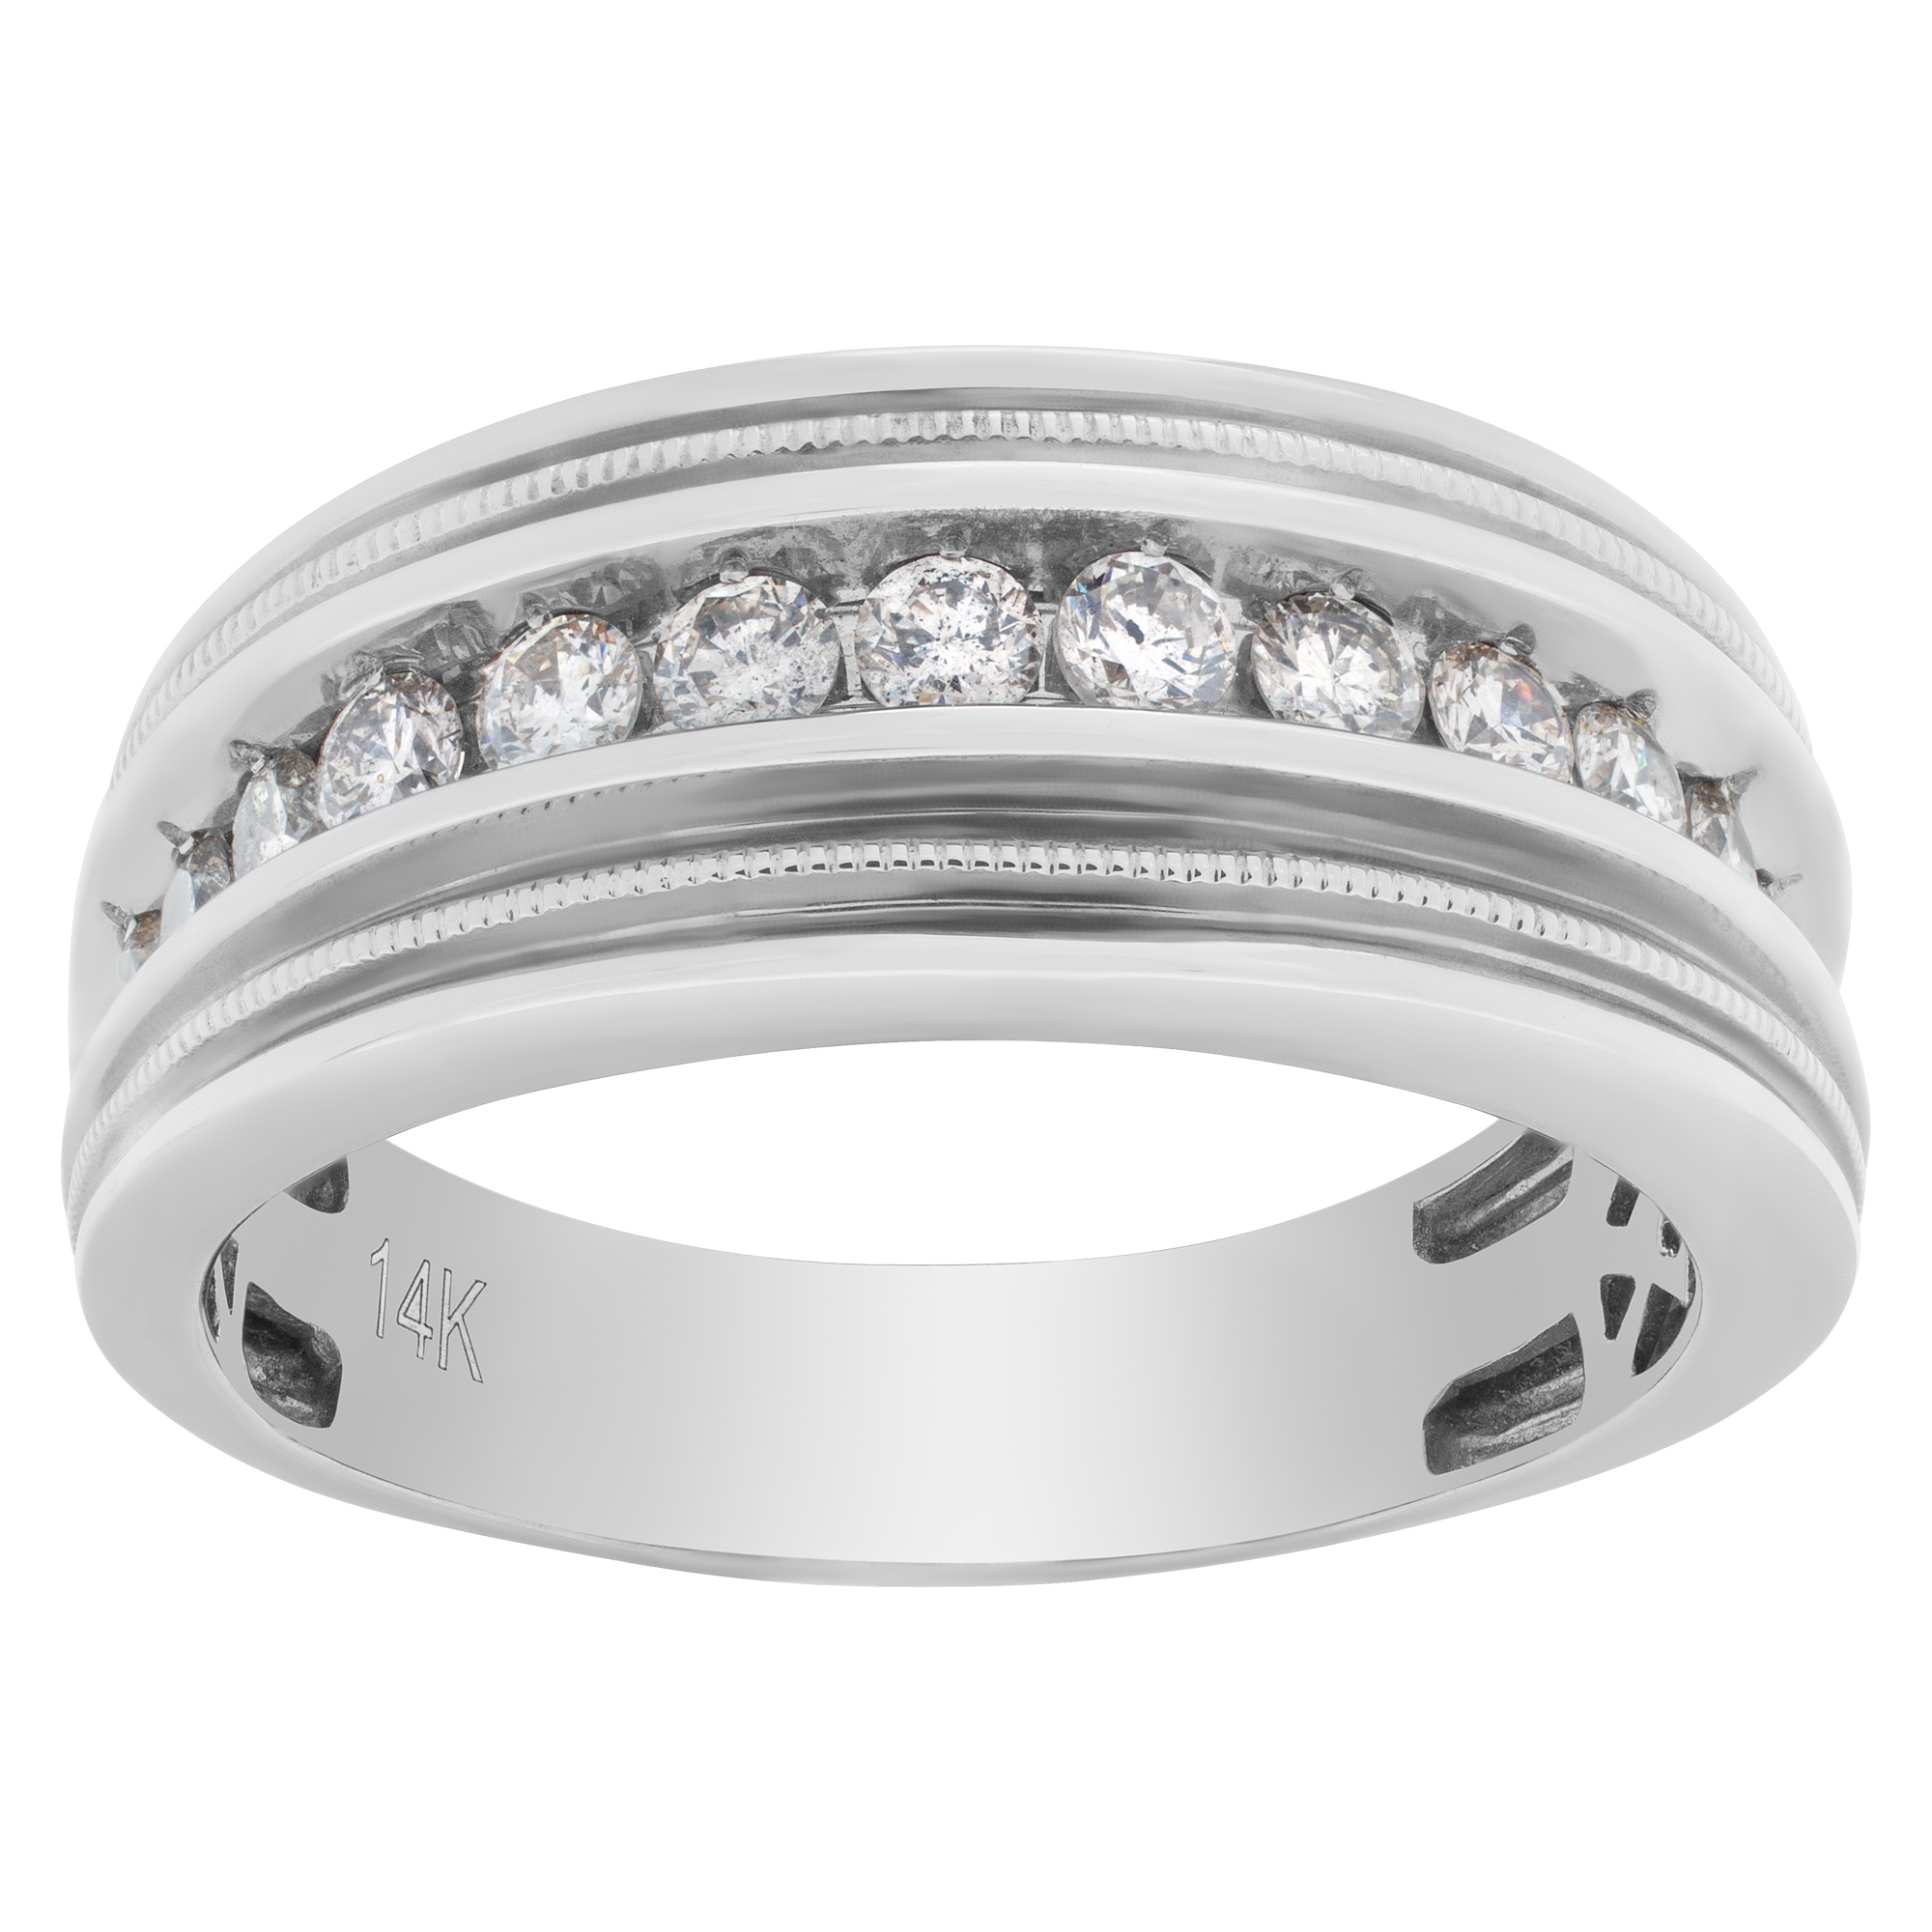 Diamond ring in 14k white gold with approx. 1 carat full cut round brilliant diamonds. (Stones)